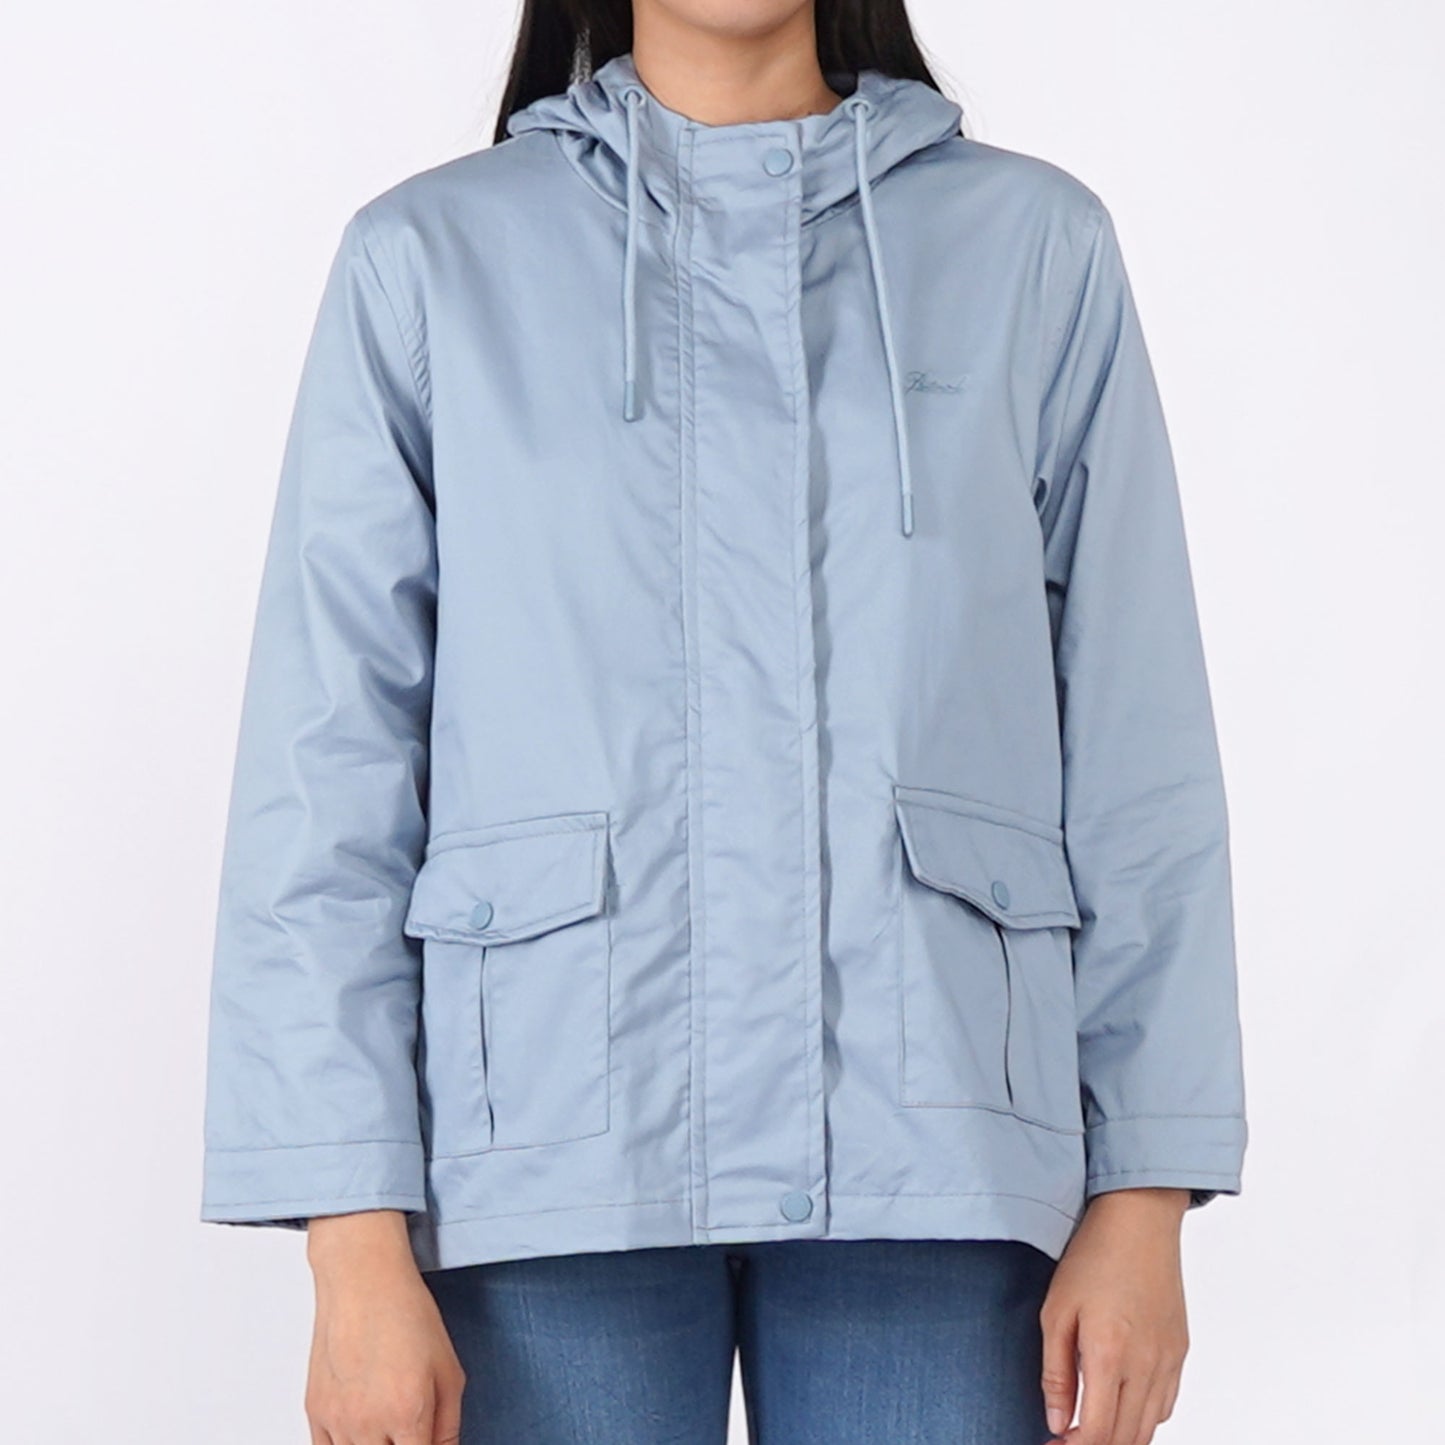 Petrol Ladies Basic Jacket Loose Fitting for Women Trendy Fashion Cotton Twill High Quality Apparel Comfortable Casual Jacket for Women 130722 (Smoke Blue)